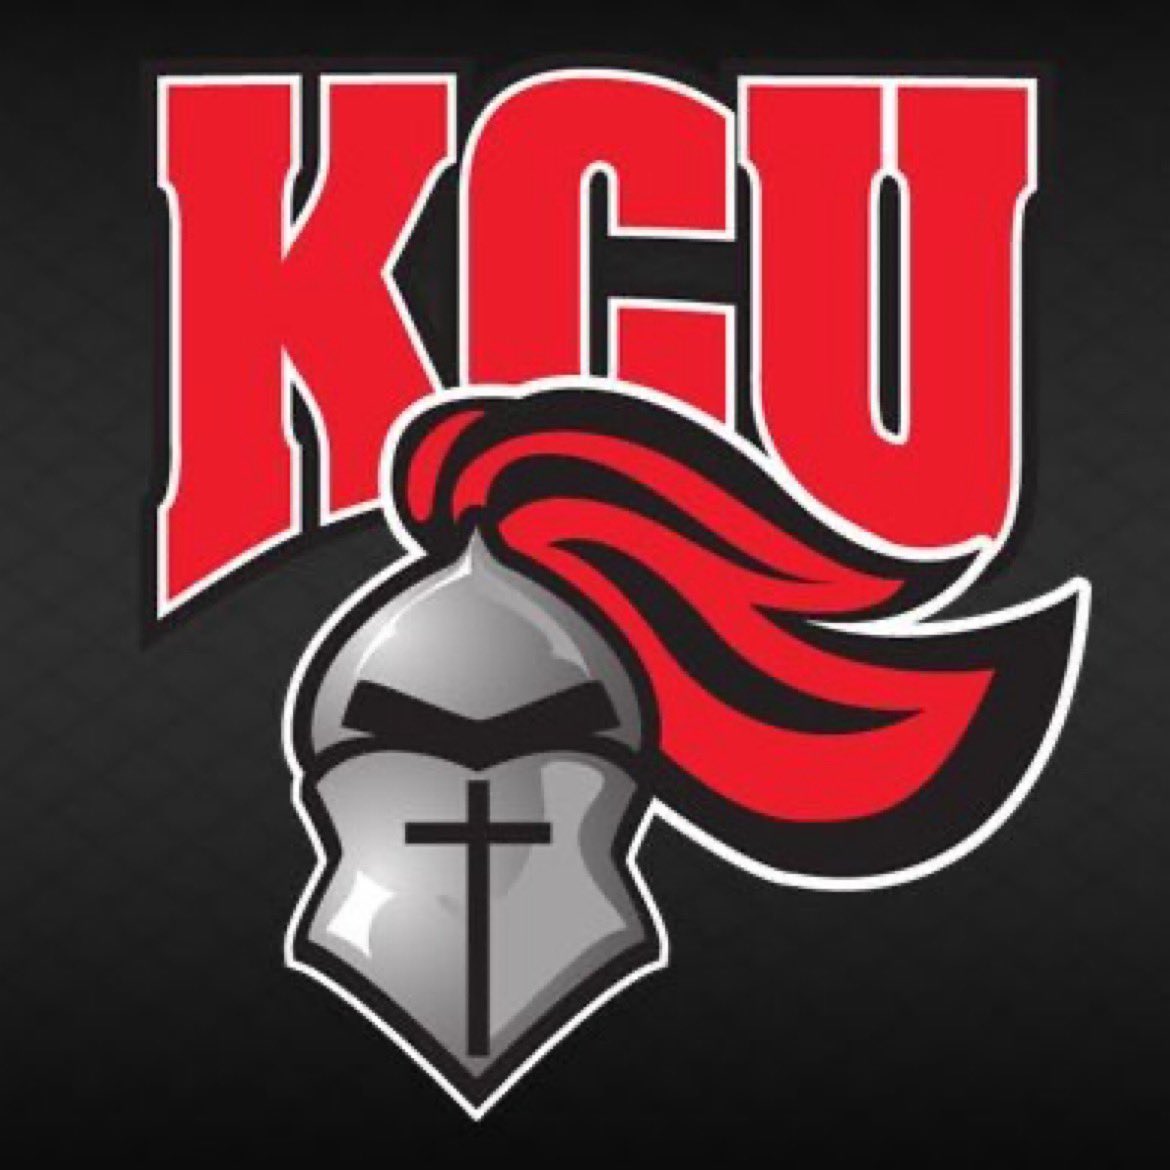 Excited to receive my first ever scholarship offer from @GoKnightsFB and @chadvanderhoof #WeNotMe x #ArmorUp